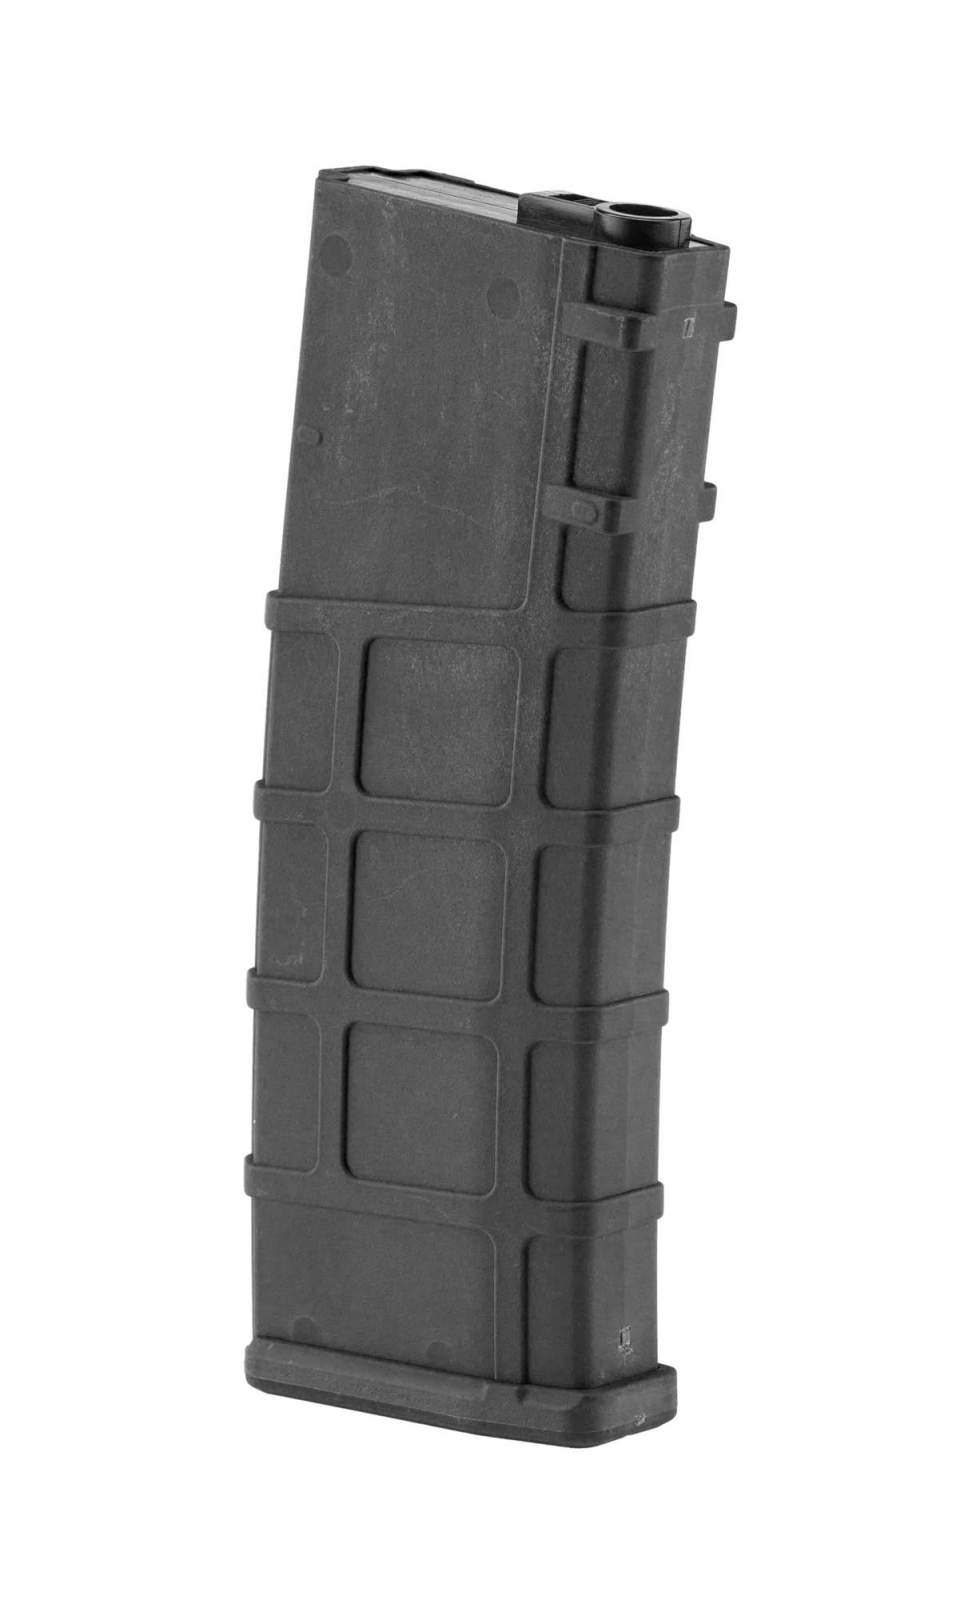 Photo Airsoft Magazine Real Cap 30 rds for M4 AEG Polymer Black - Pack of 6 pcs